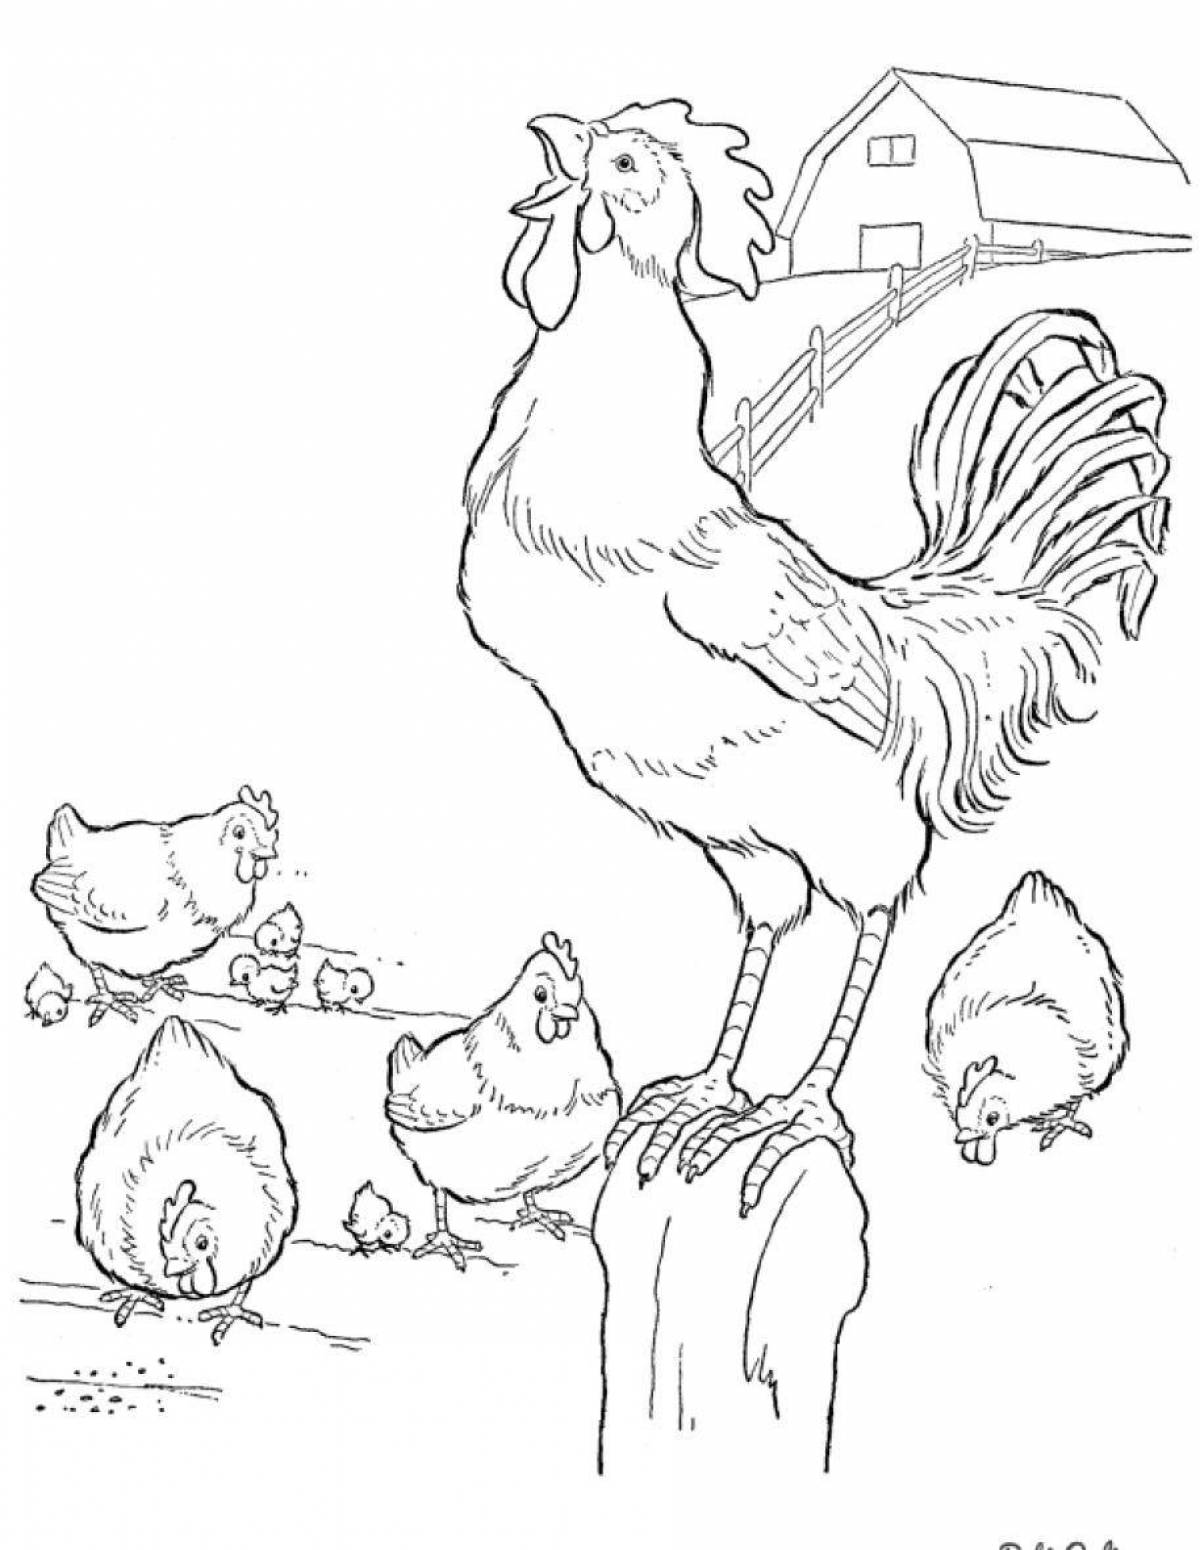 Brilliant bird yard coloring page for toddlers